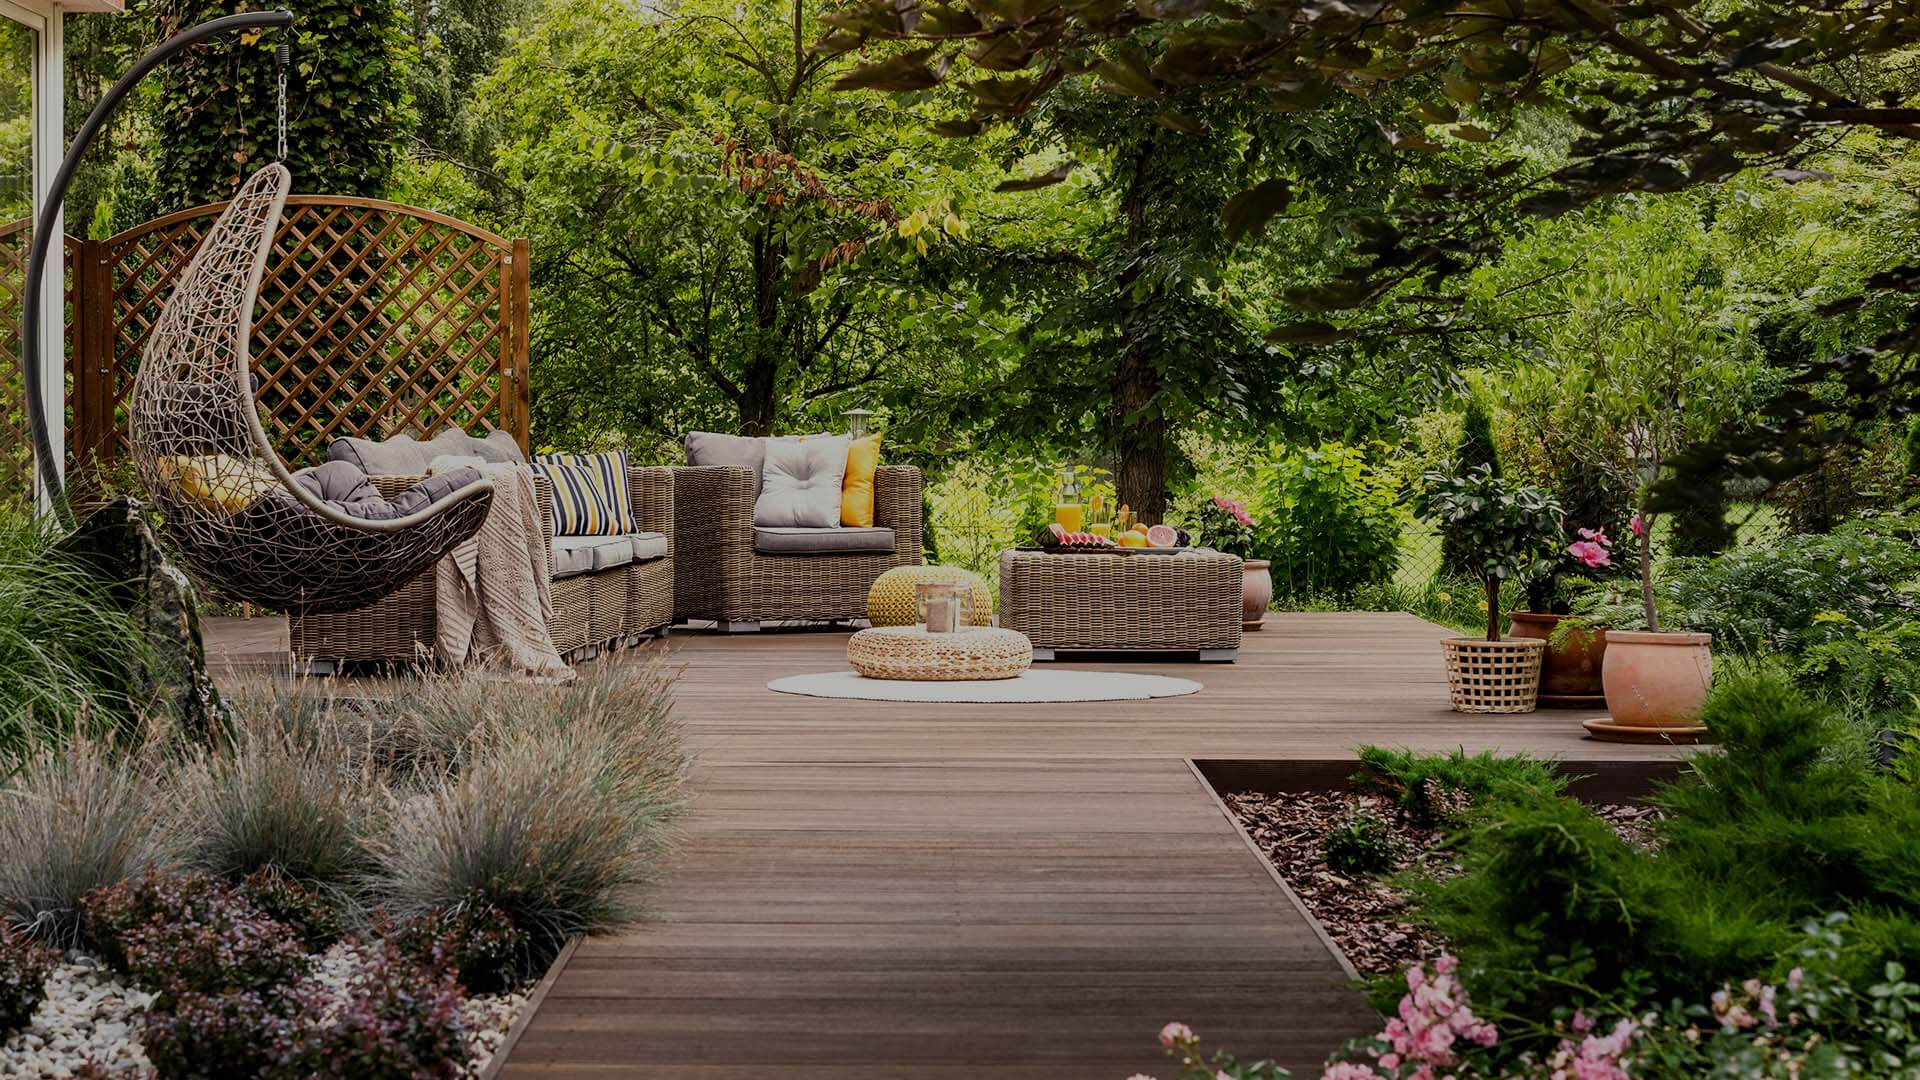 A photo of some beautifully crafted garden decking